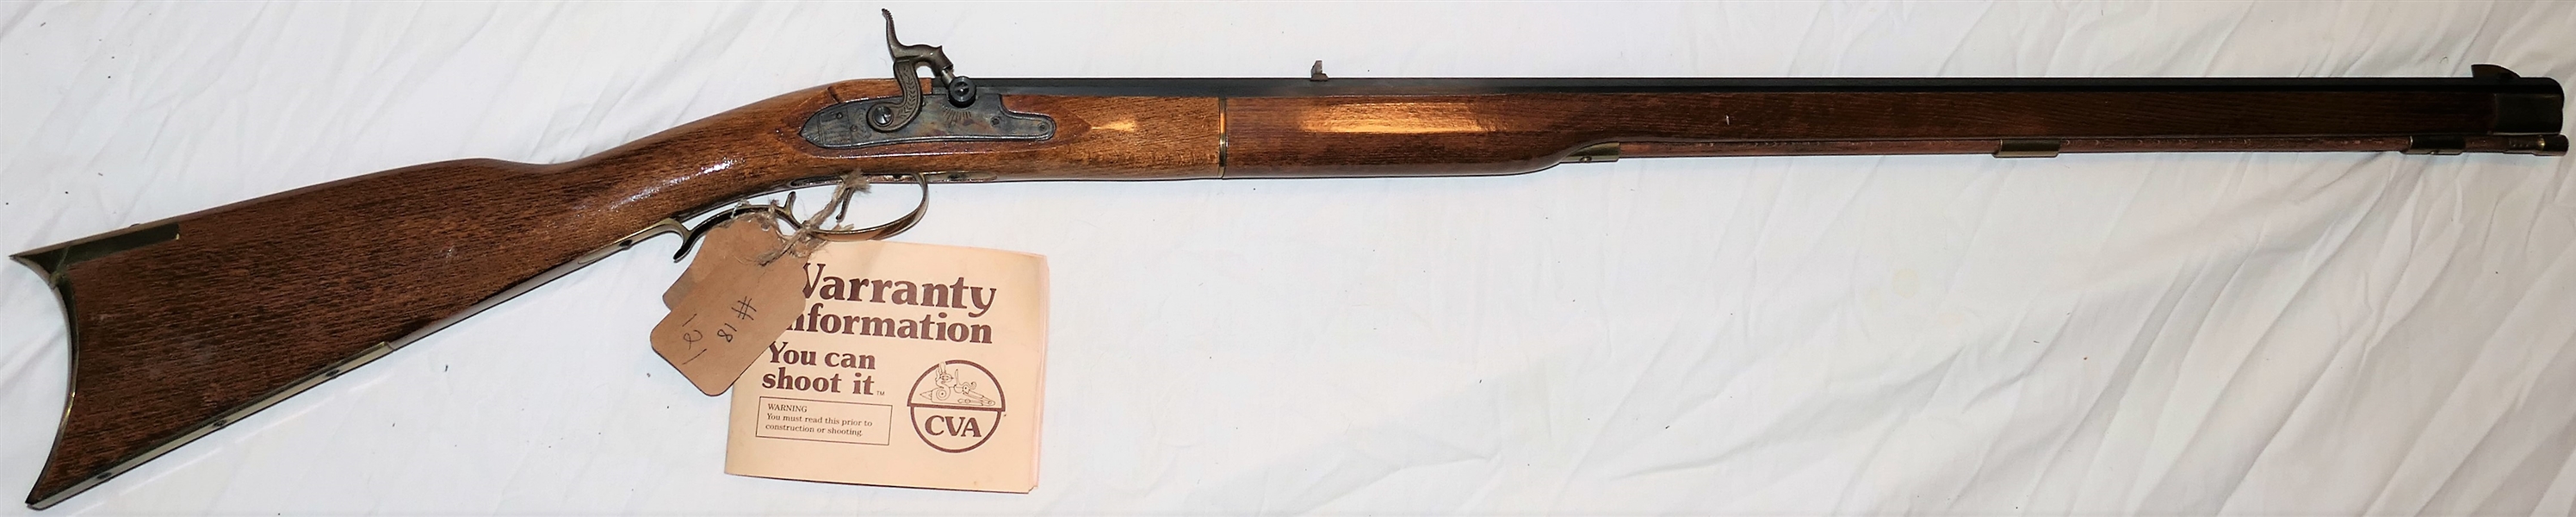 Connecticut Valley Arms Inc. "Kentucky Rifle" .50 Caliber Black Powder Long Rifle with Original Attached Warranty Information Booklet